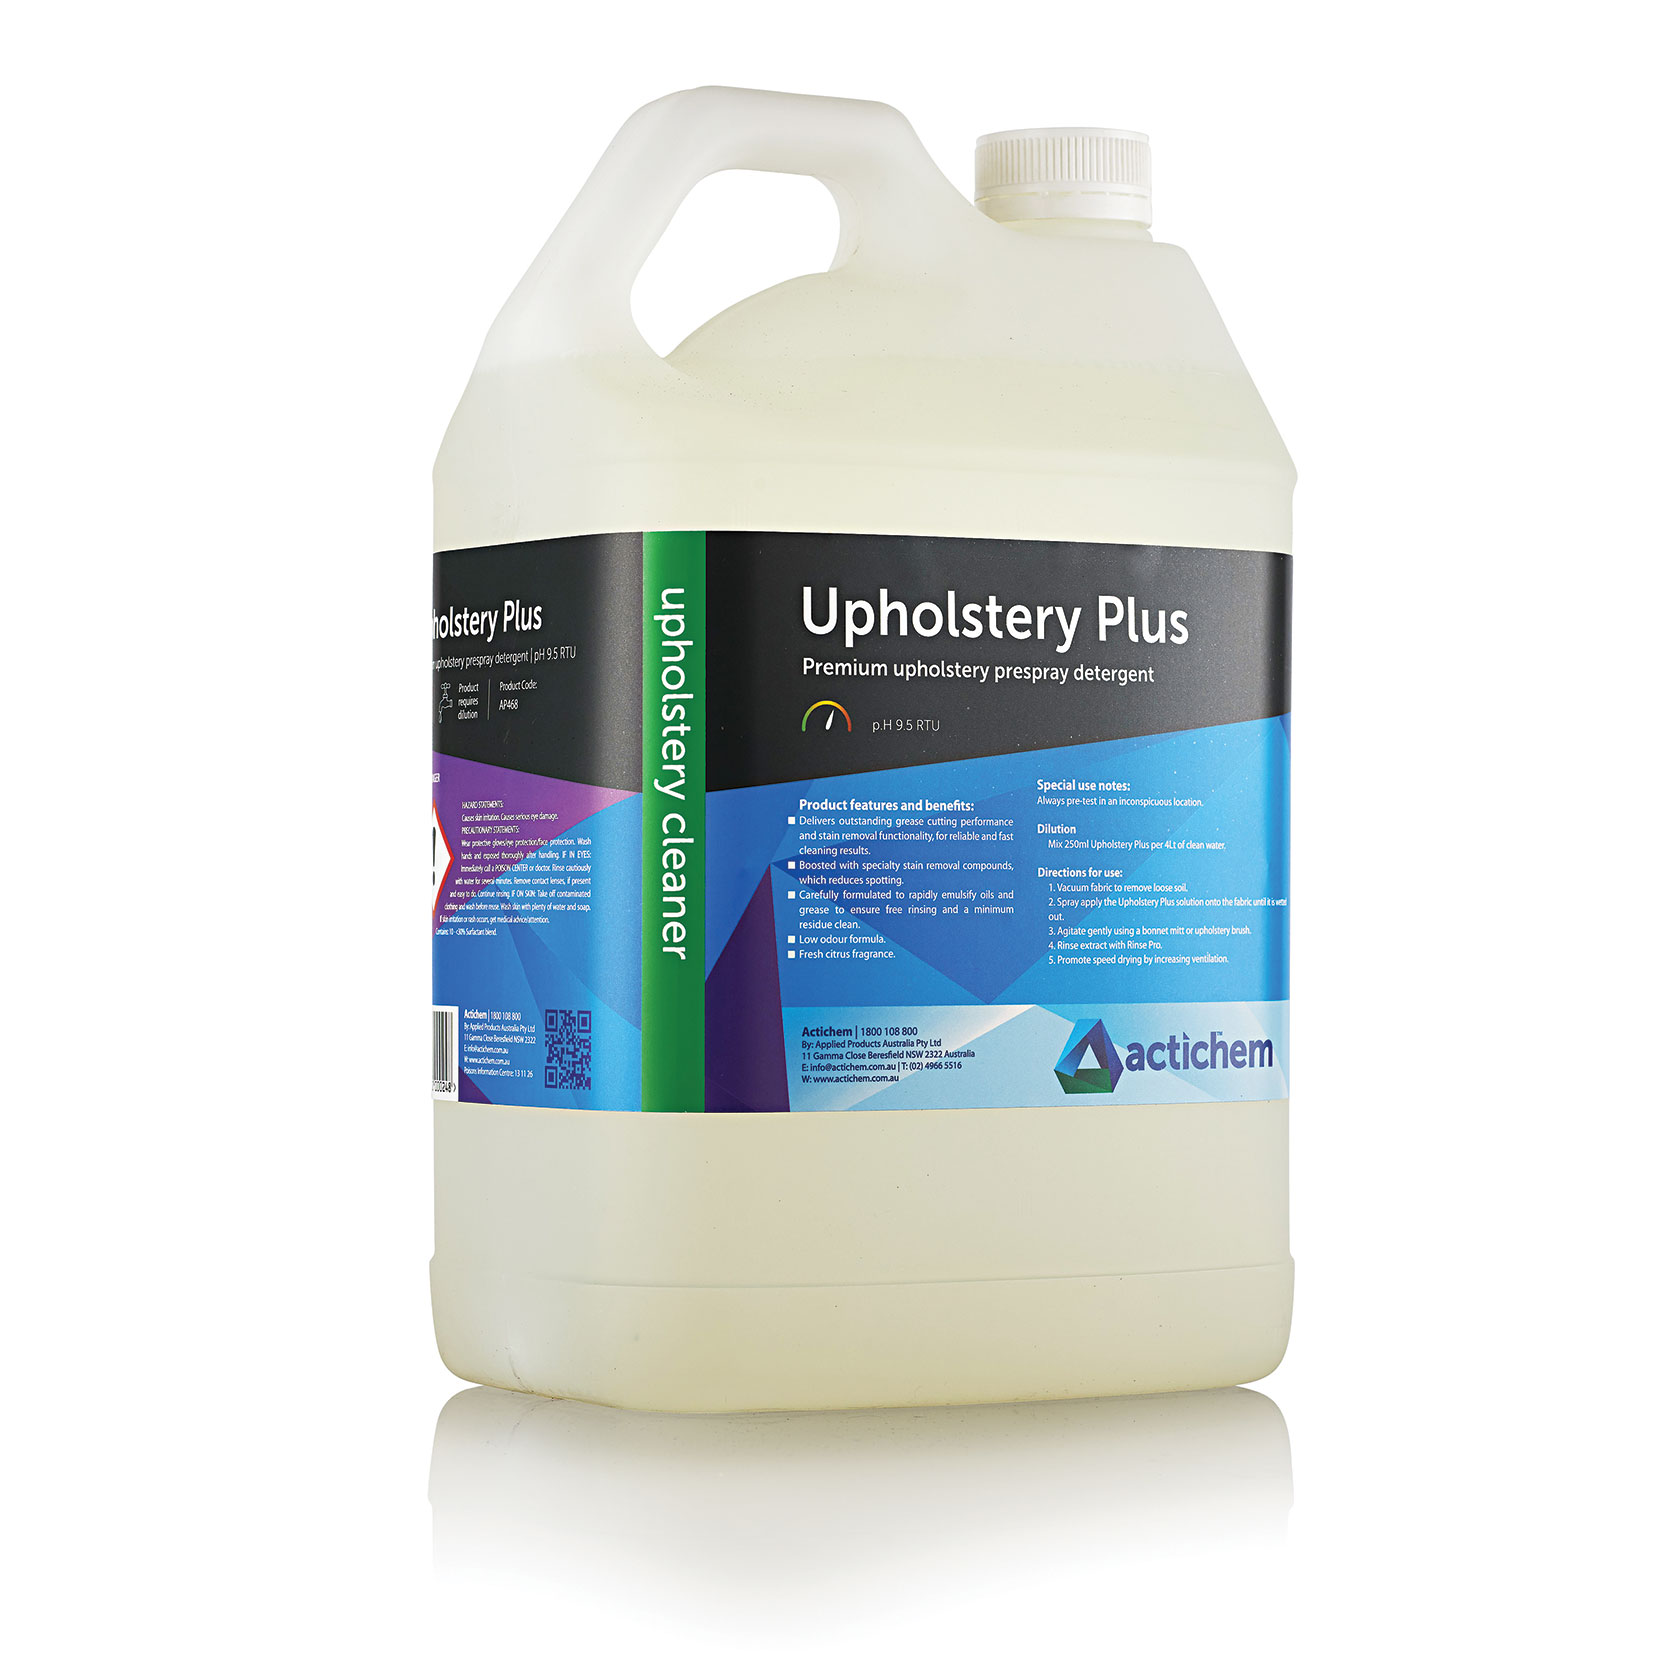 Actichem Upholstery Plus professional upholstery pre-spray detergent